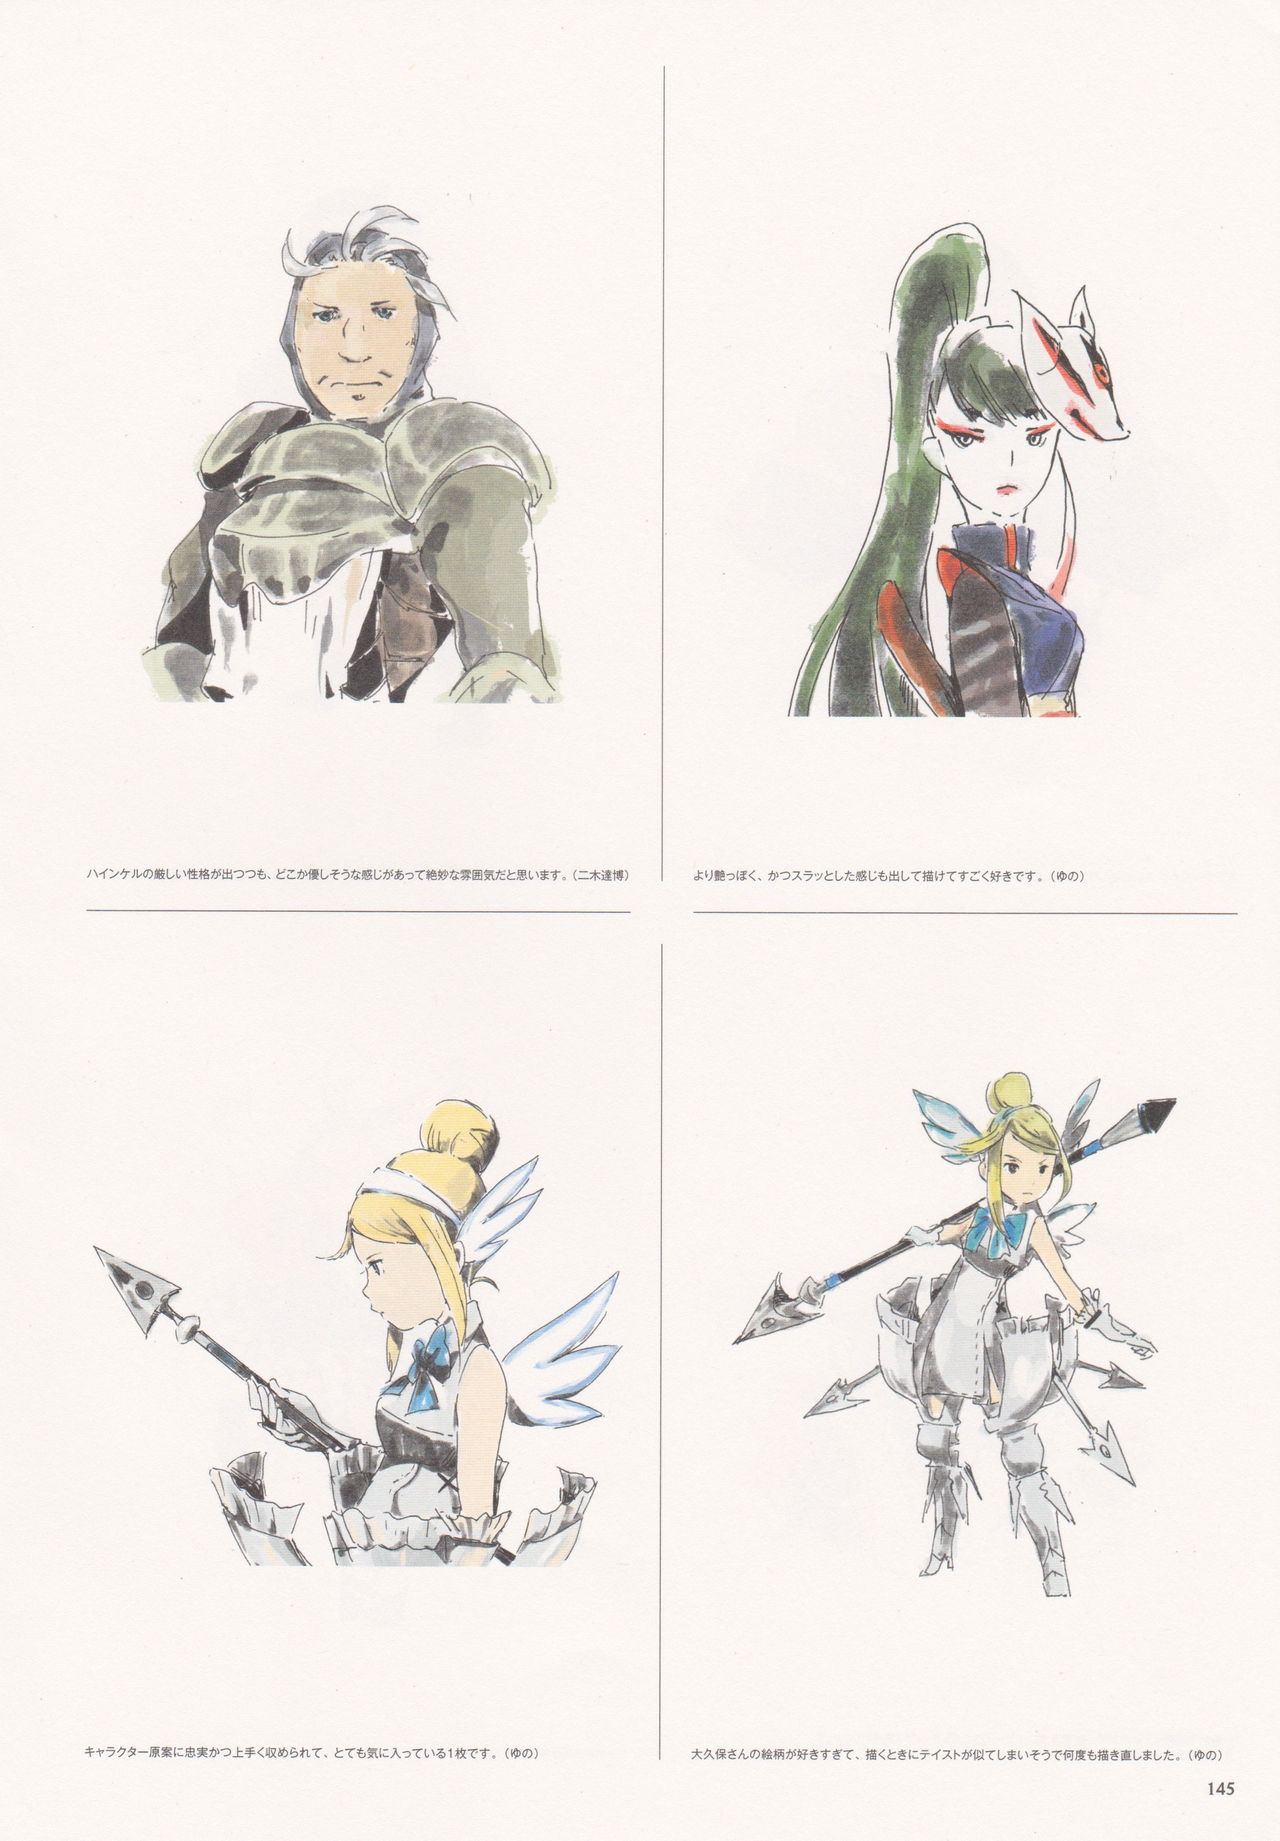 Bravely Second - End Layer - Design Works THE ART OF BRAVELY 2013-2015 145